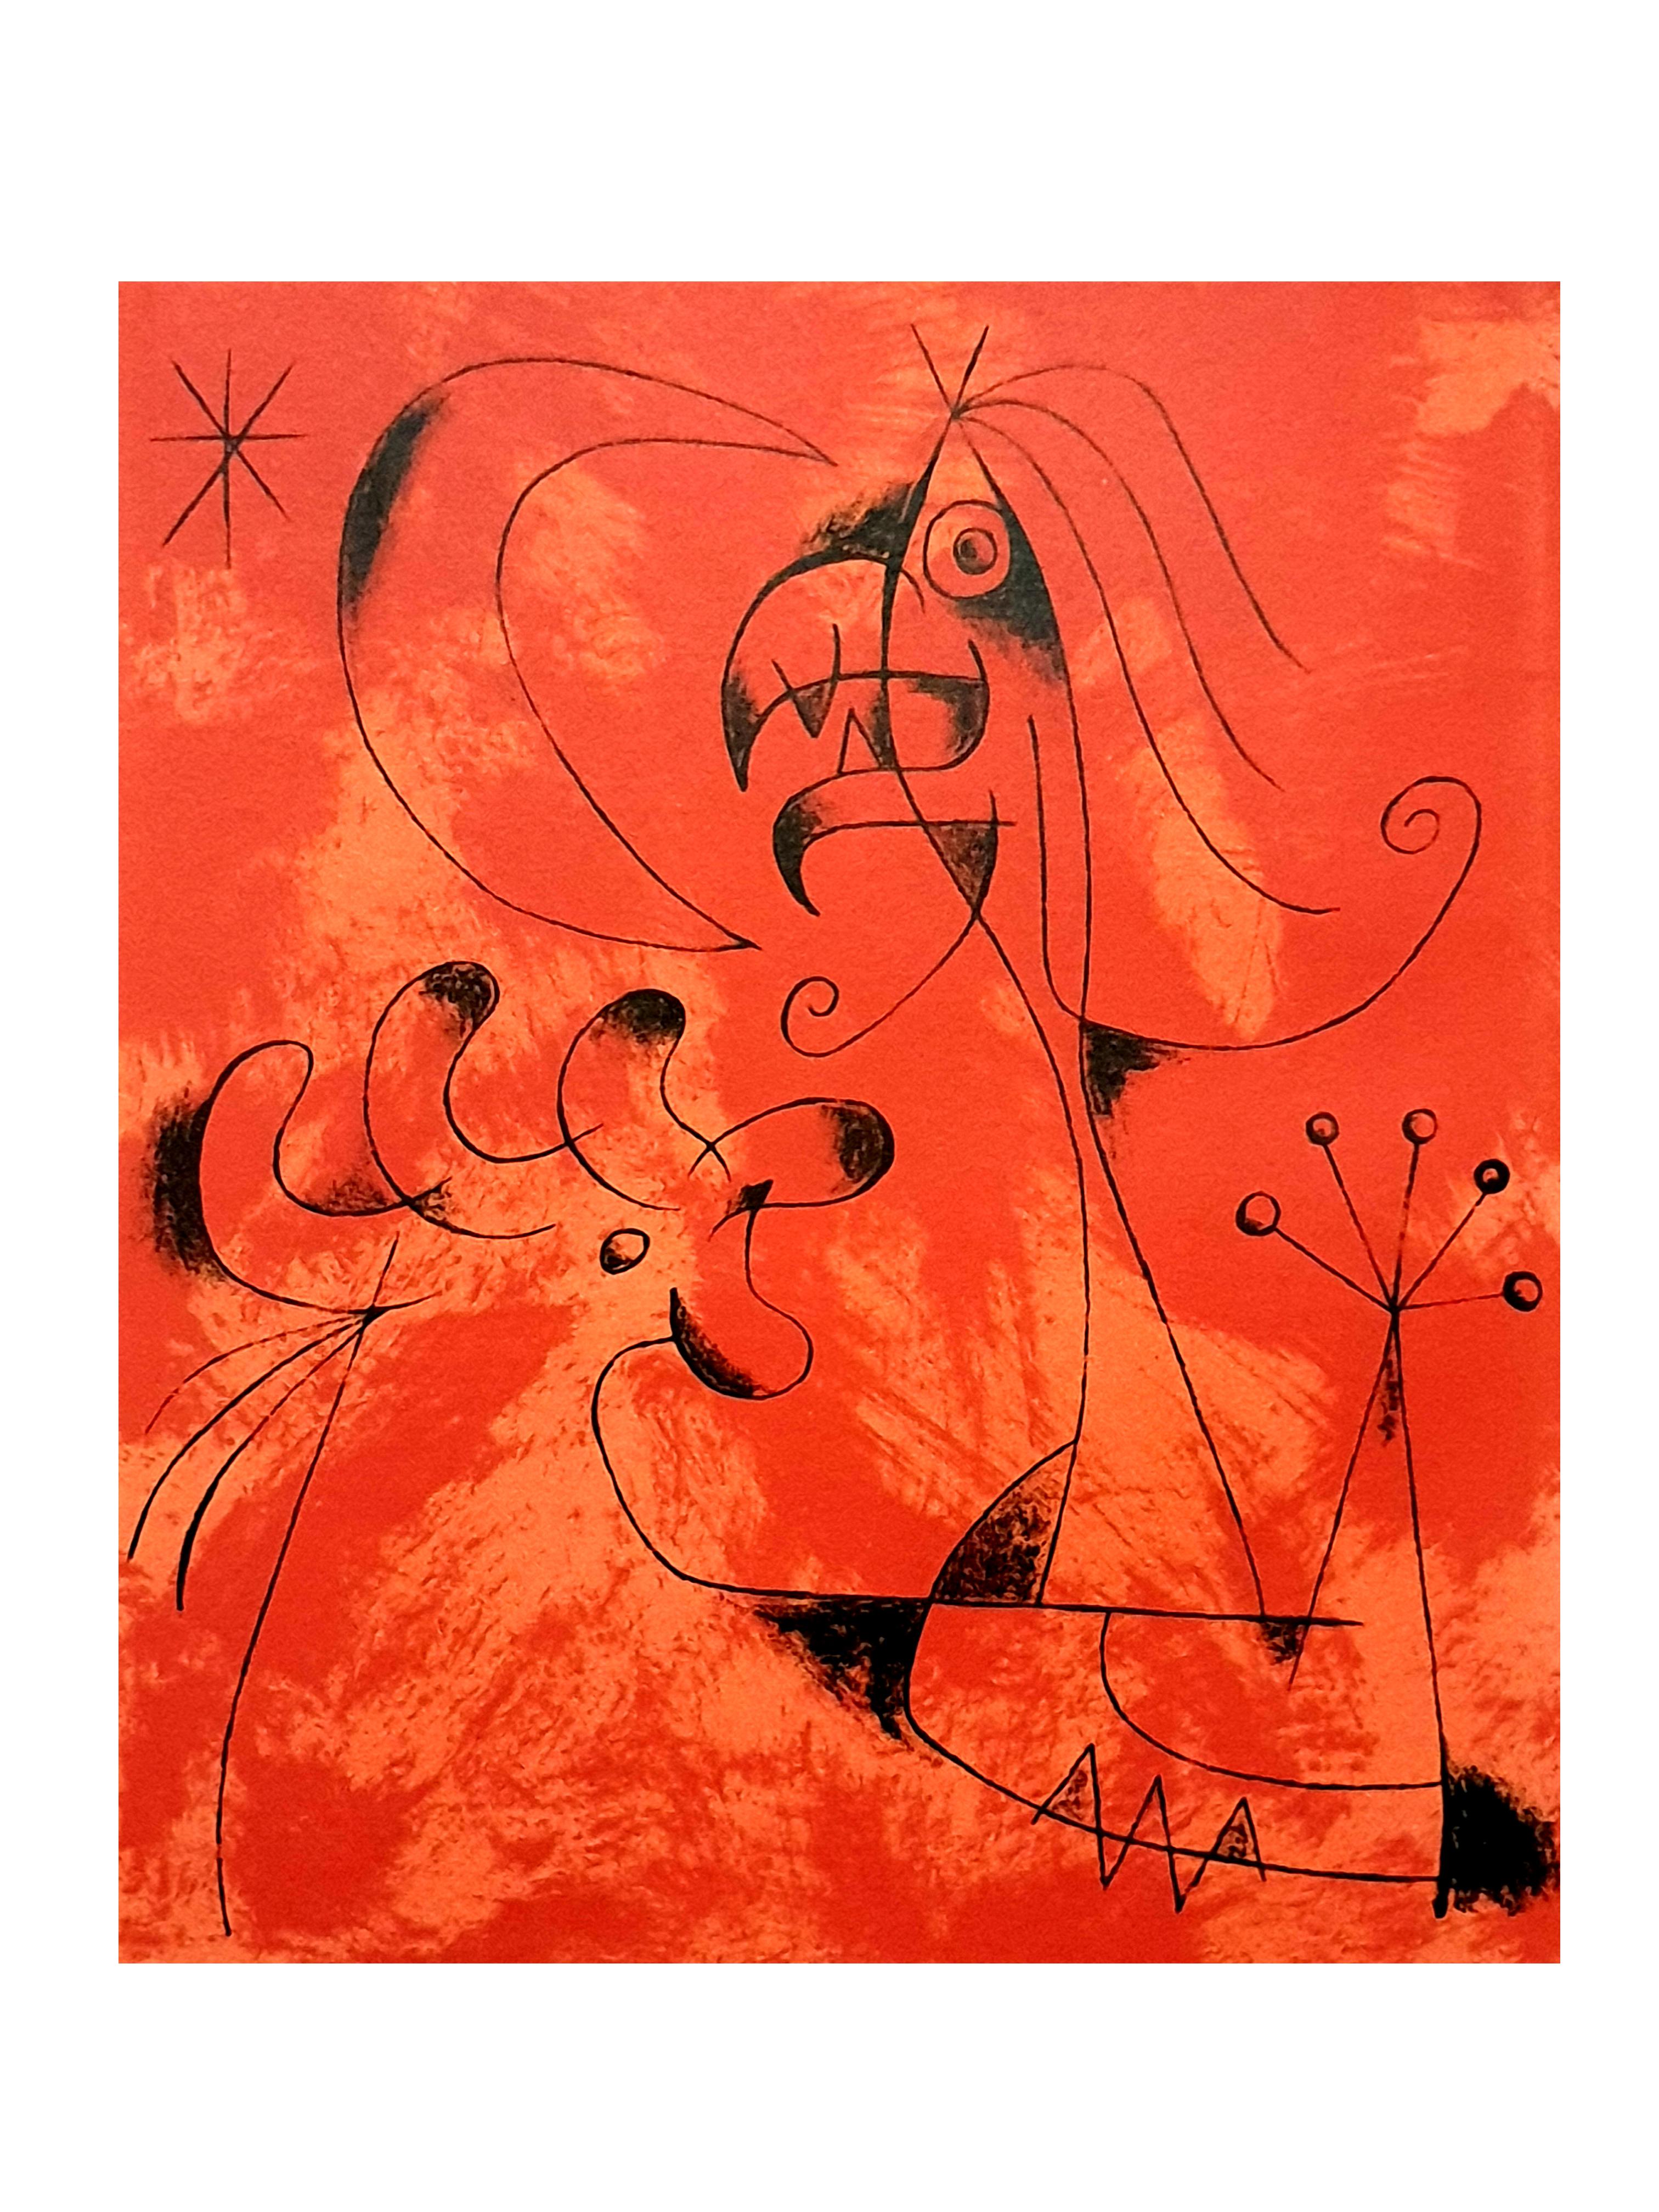 Plate VI, from Joan Miro by Jacques Prévert and Georges Ribemont-Dessaignes